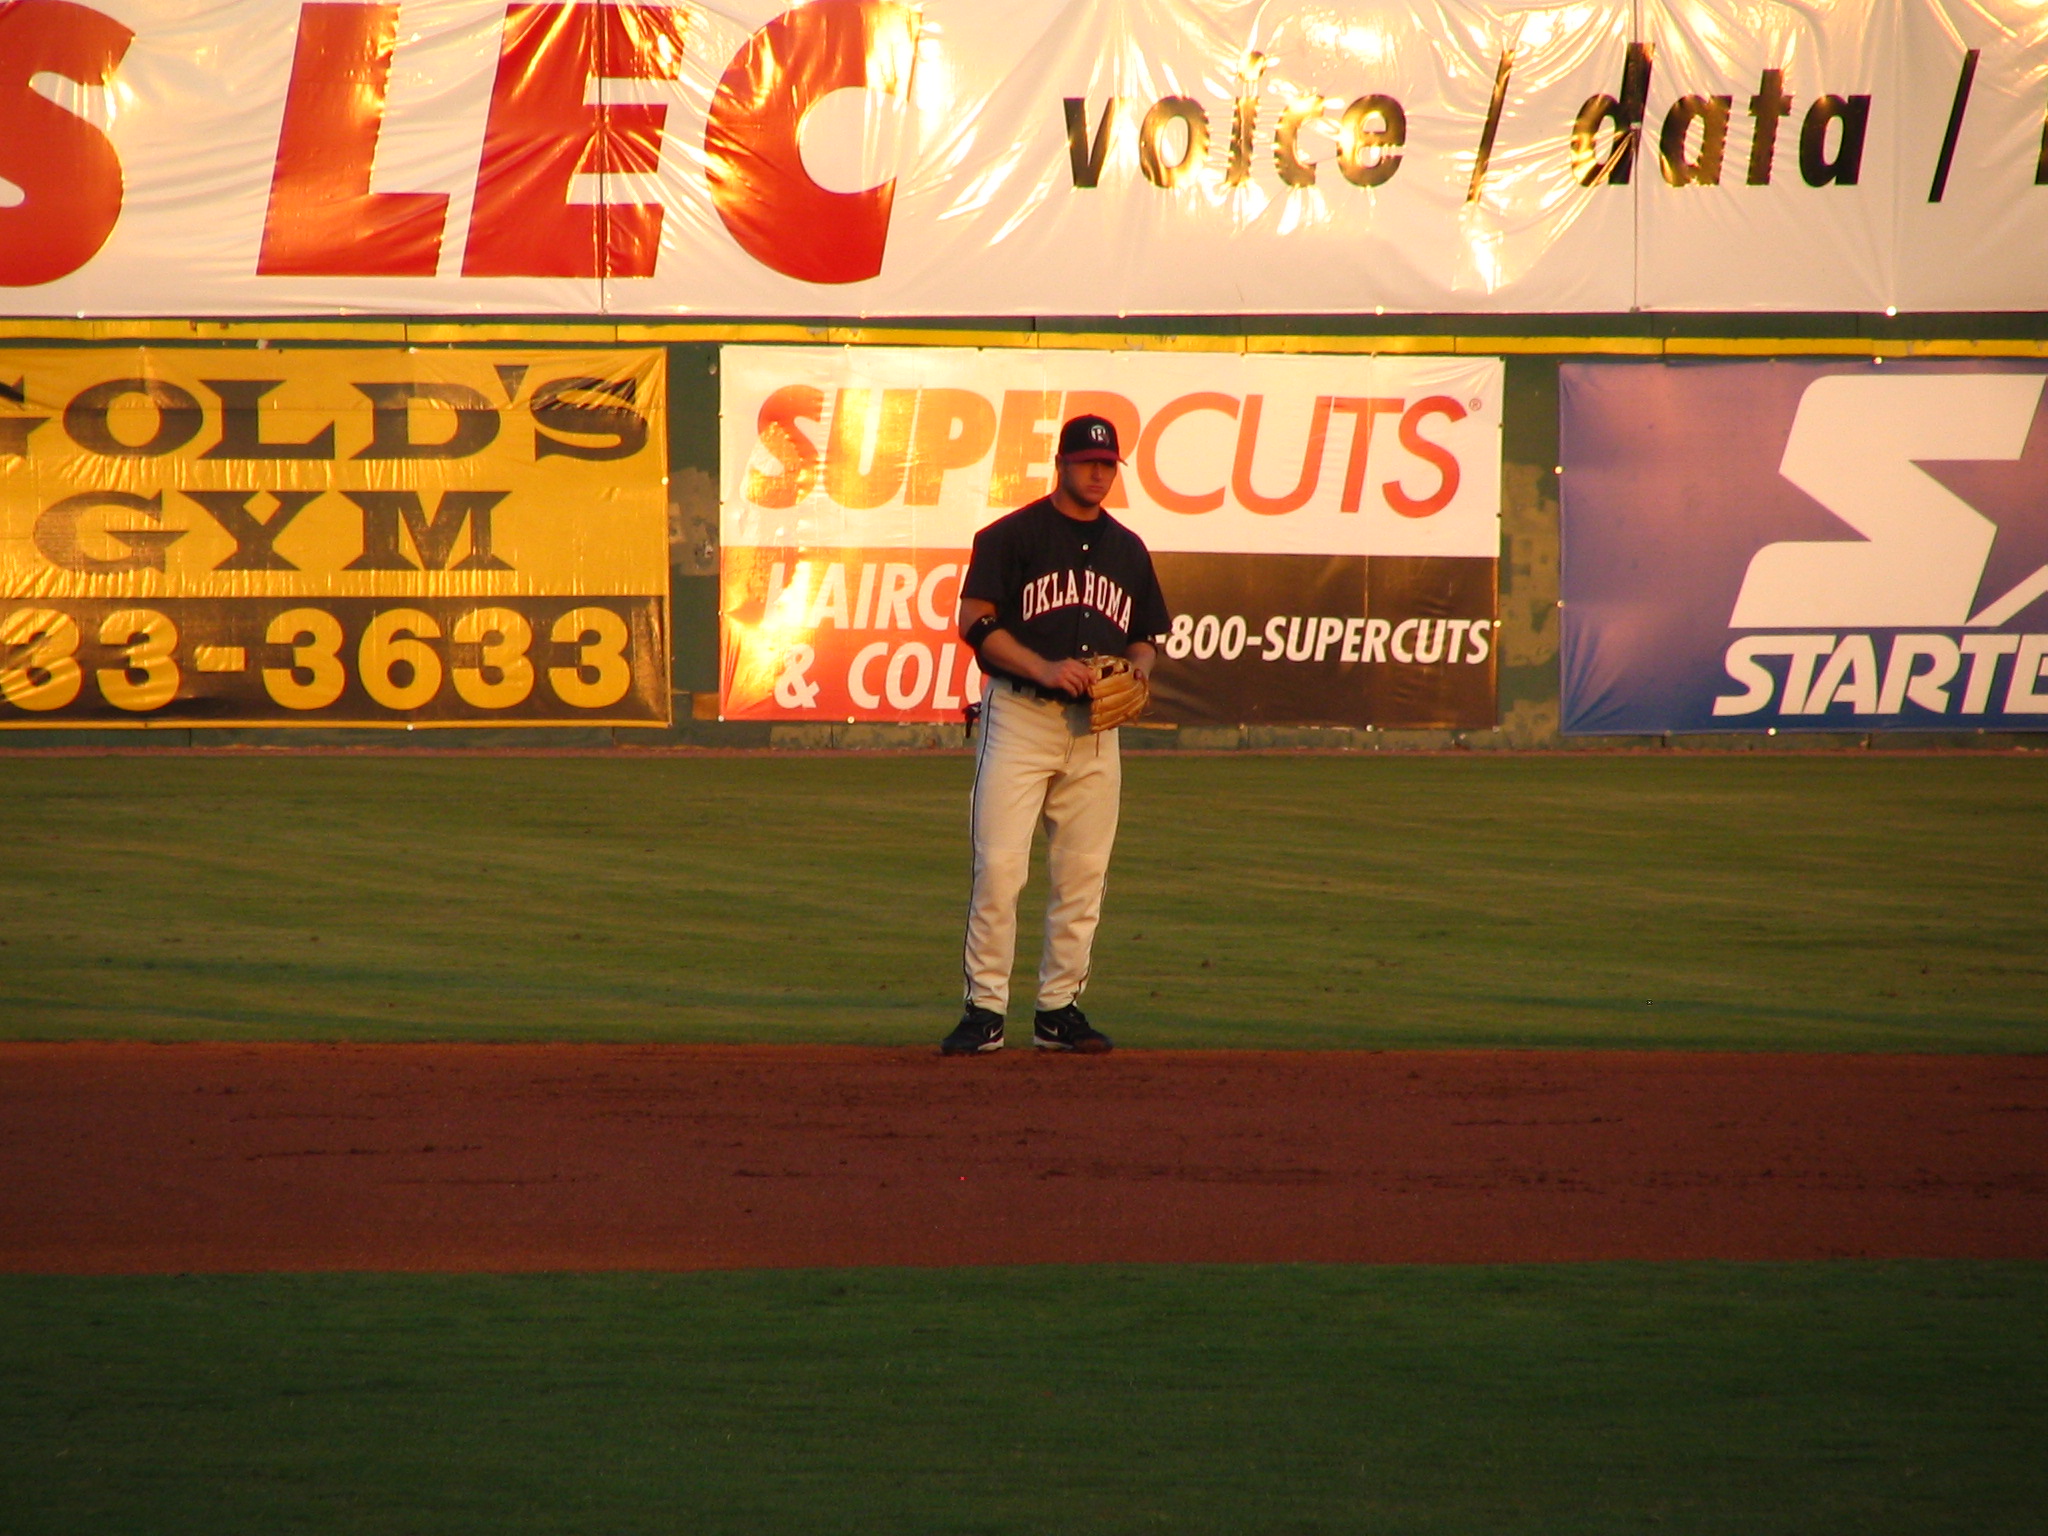 the pitcher stands at the end of the field